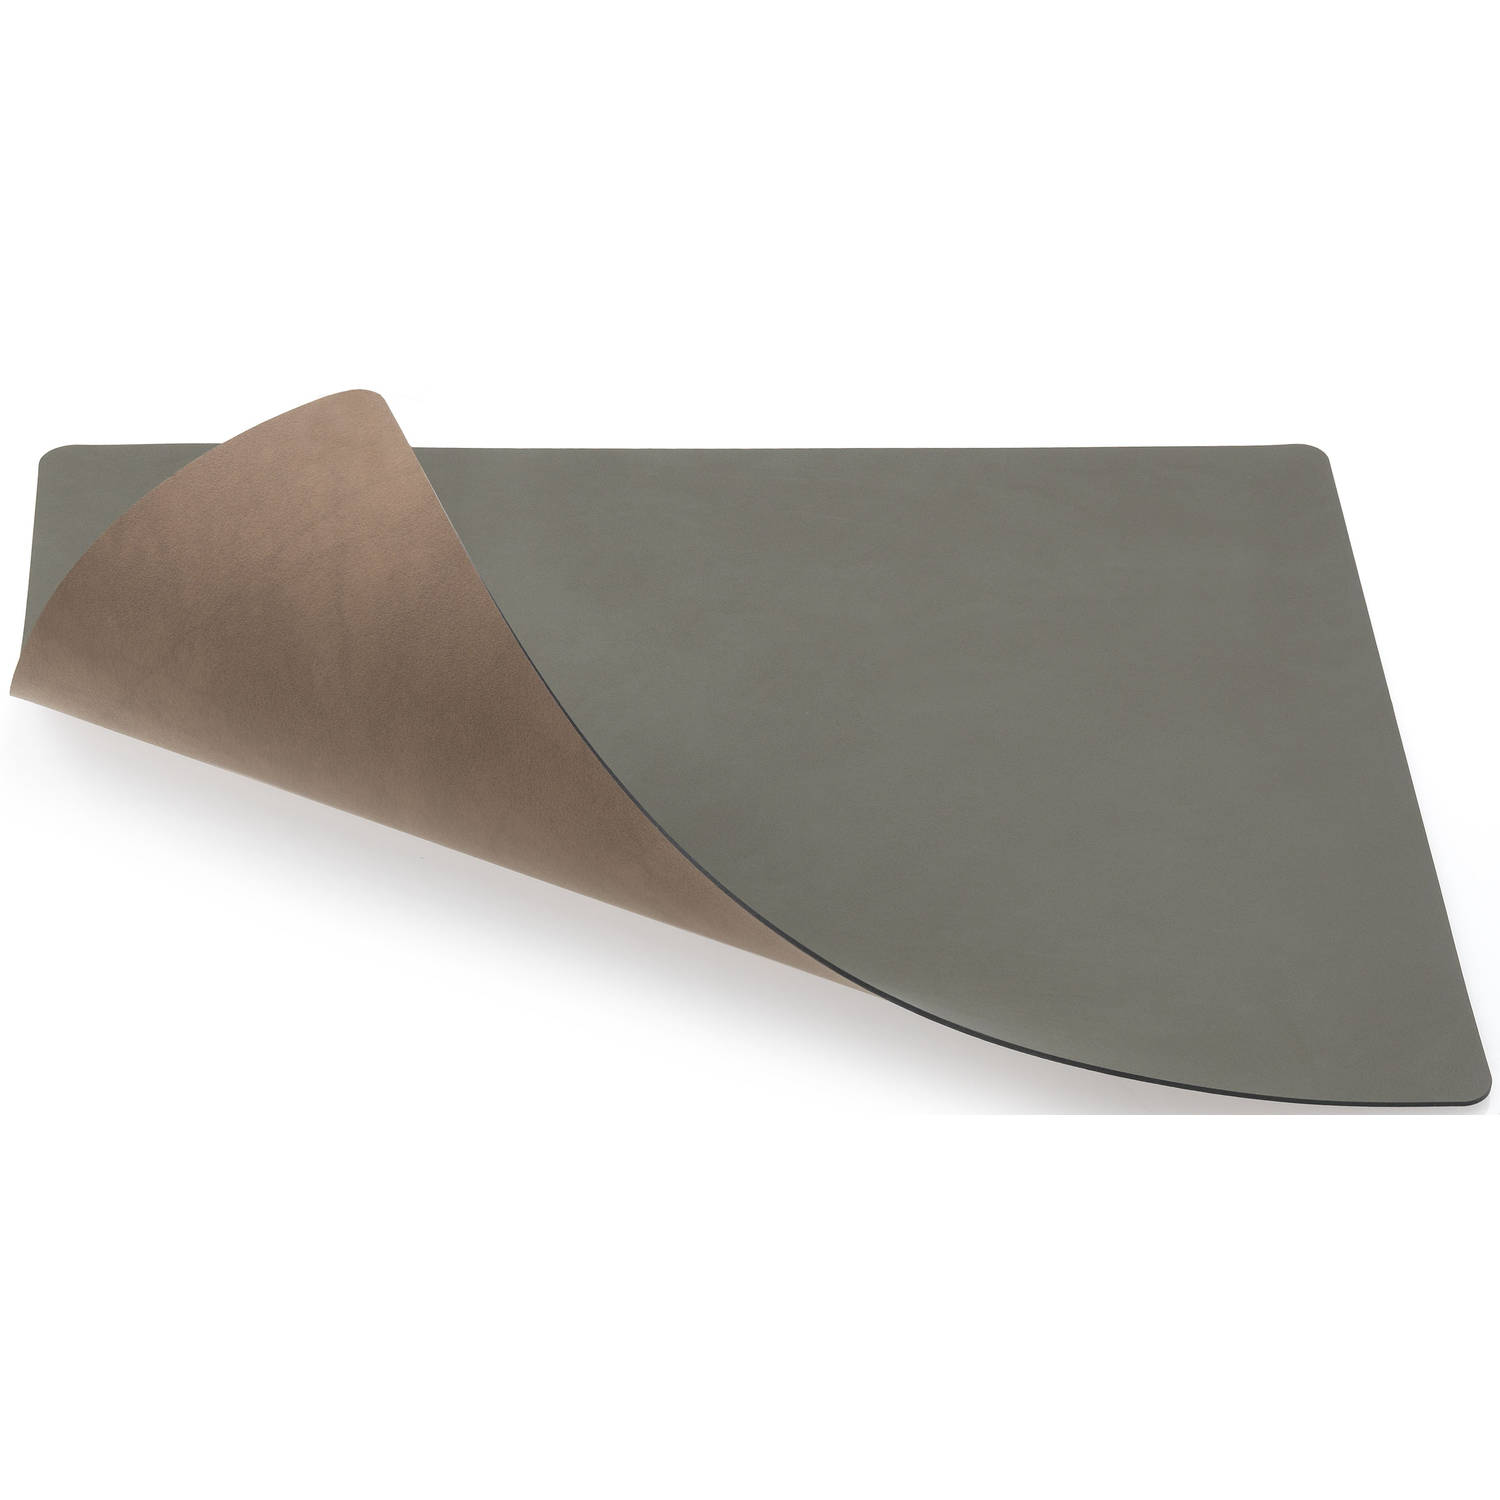 Lind Nupo/Nupo placemat square 35x45cm army green/nature